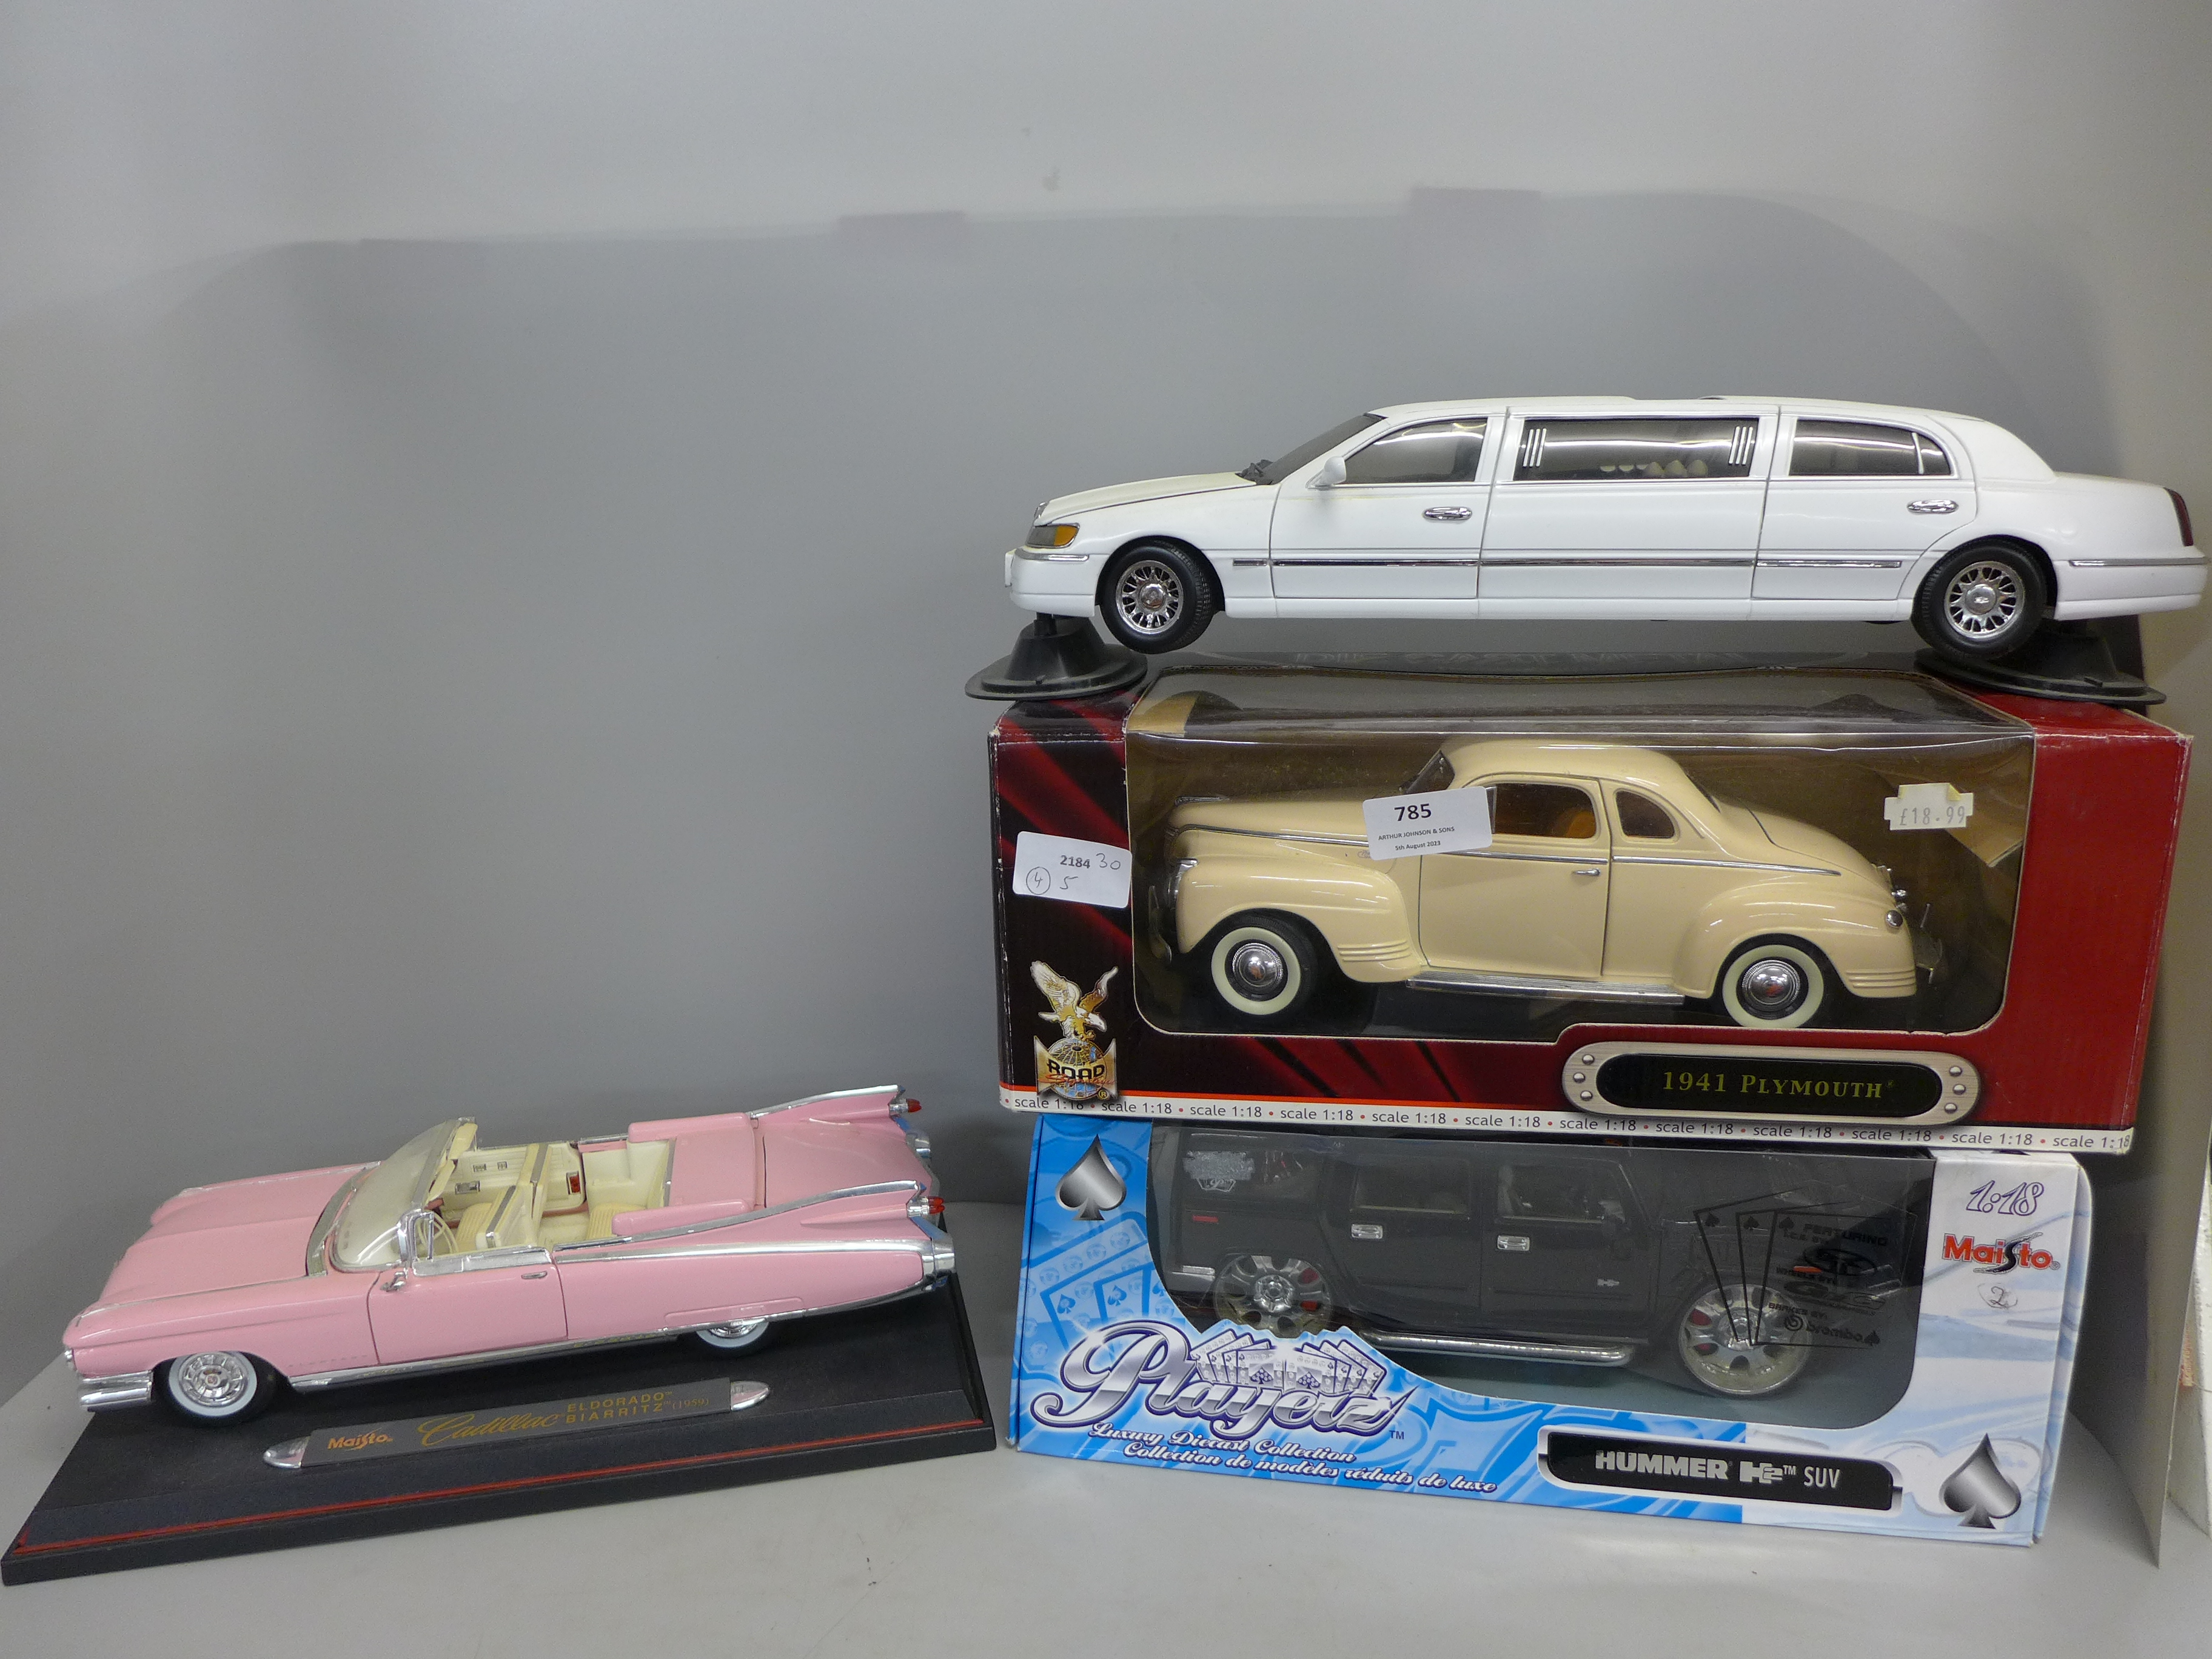 Four 1/18th scale model vehicles, Maisto Hummer SUV, Signature 1941 Plymouth, Maisto Pink Cadillac